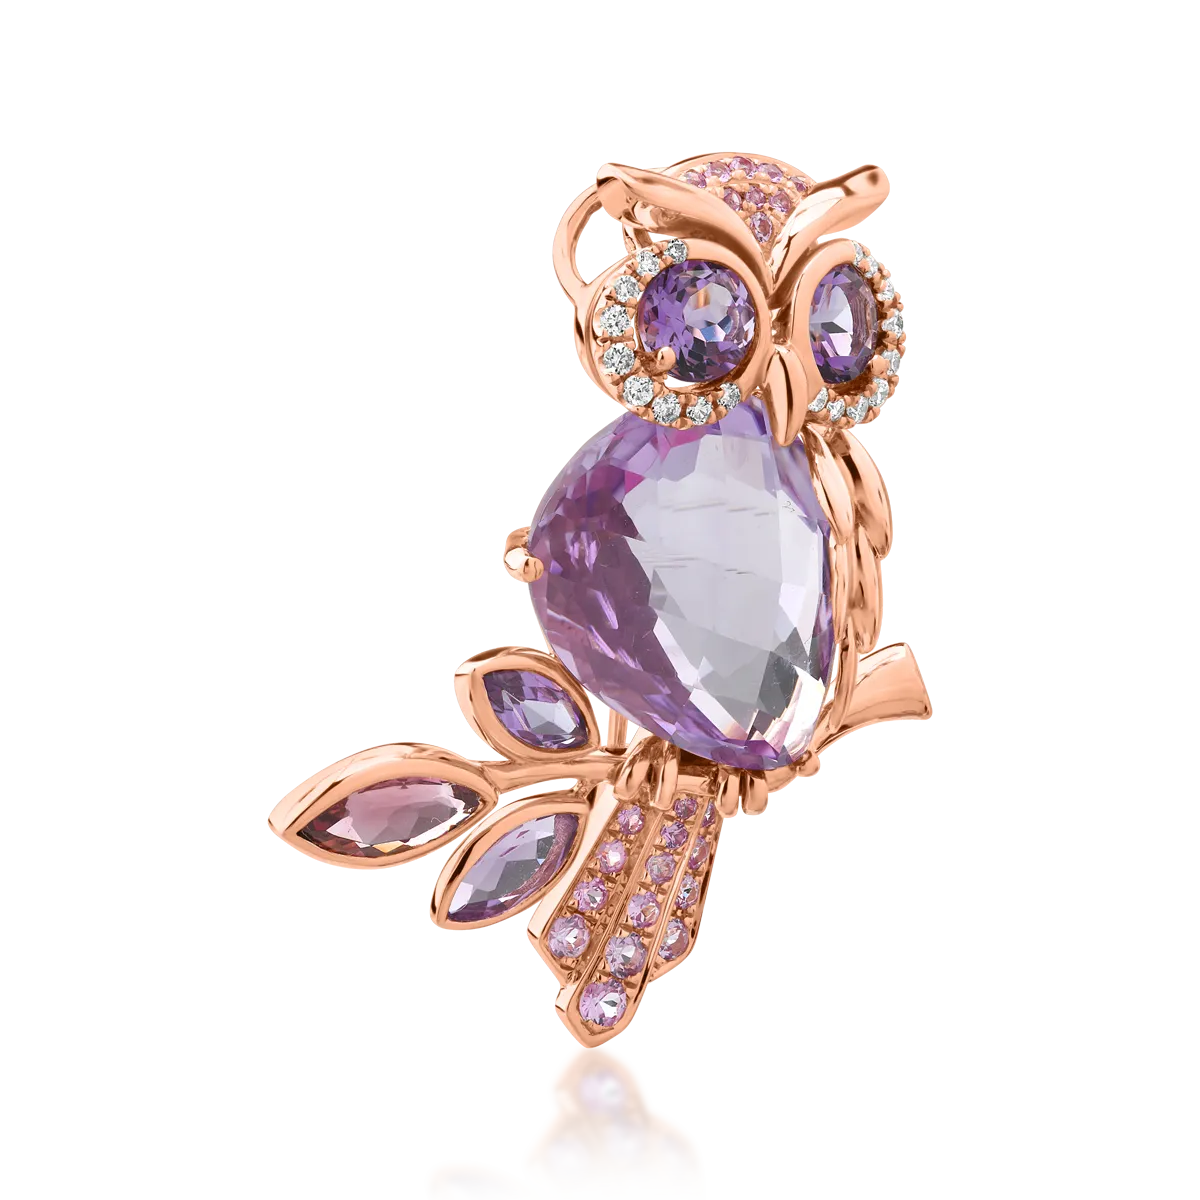 18K rose gold brooch with 10.4ct amethyst and 0.5ct pink tourmaline